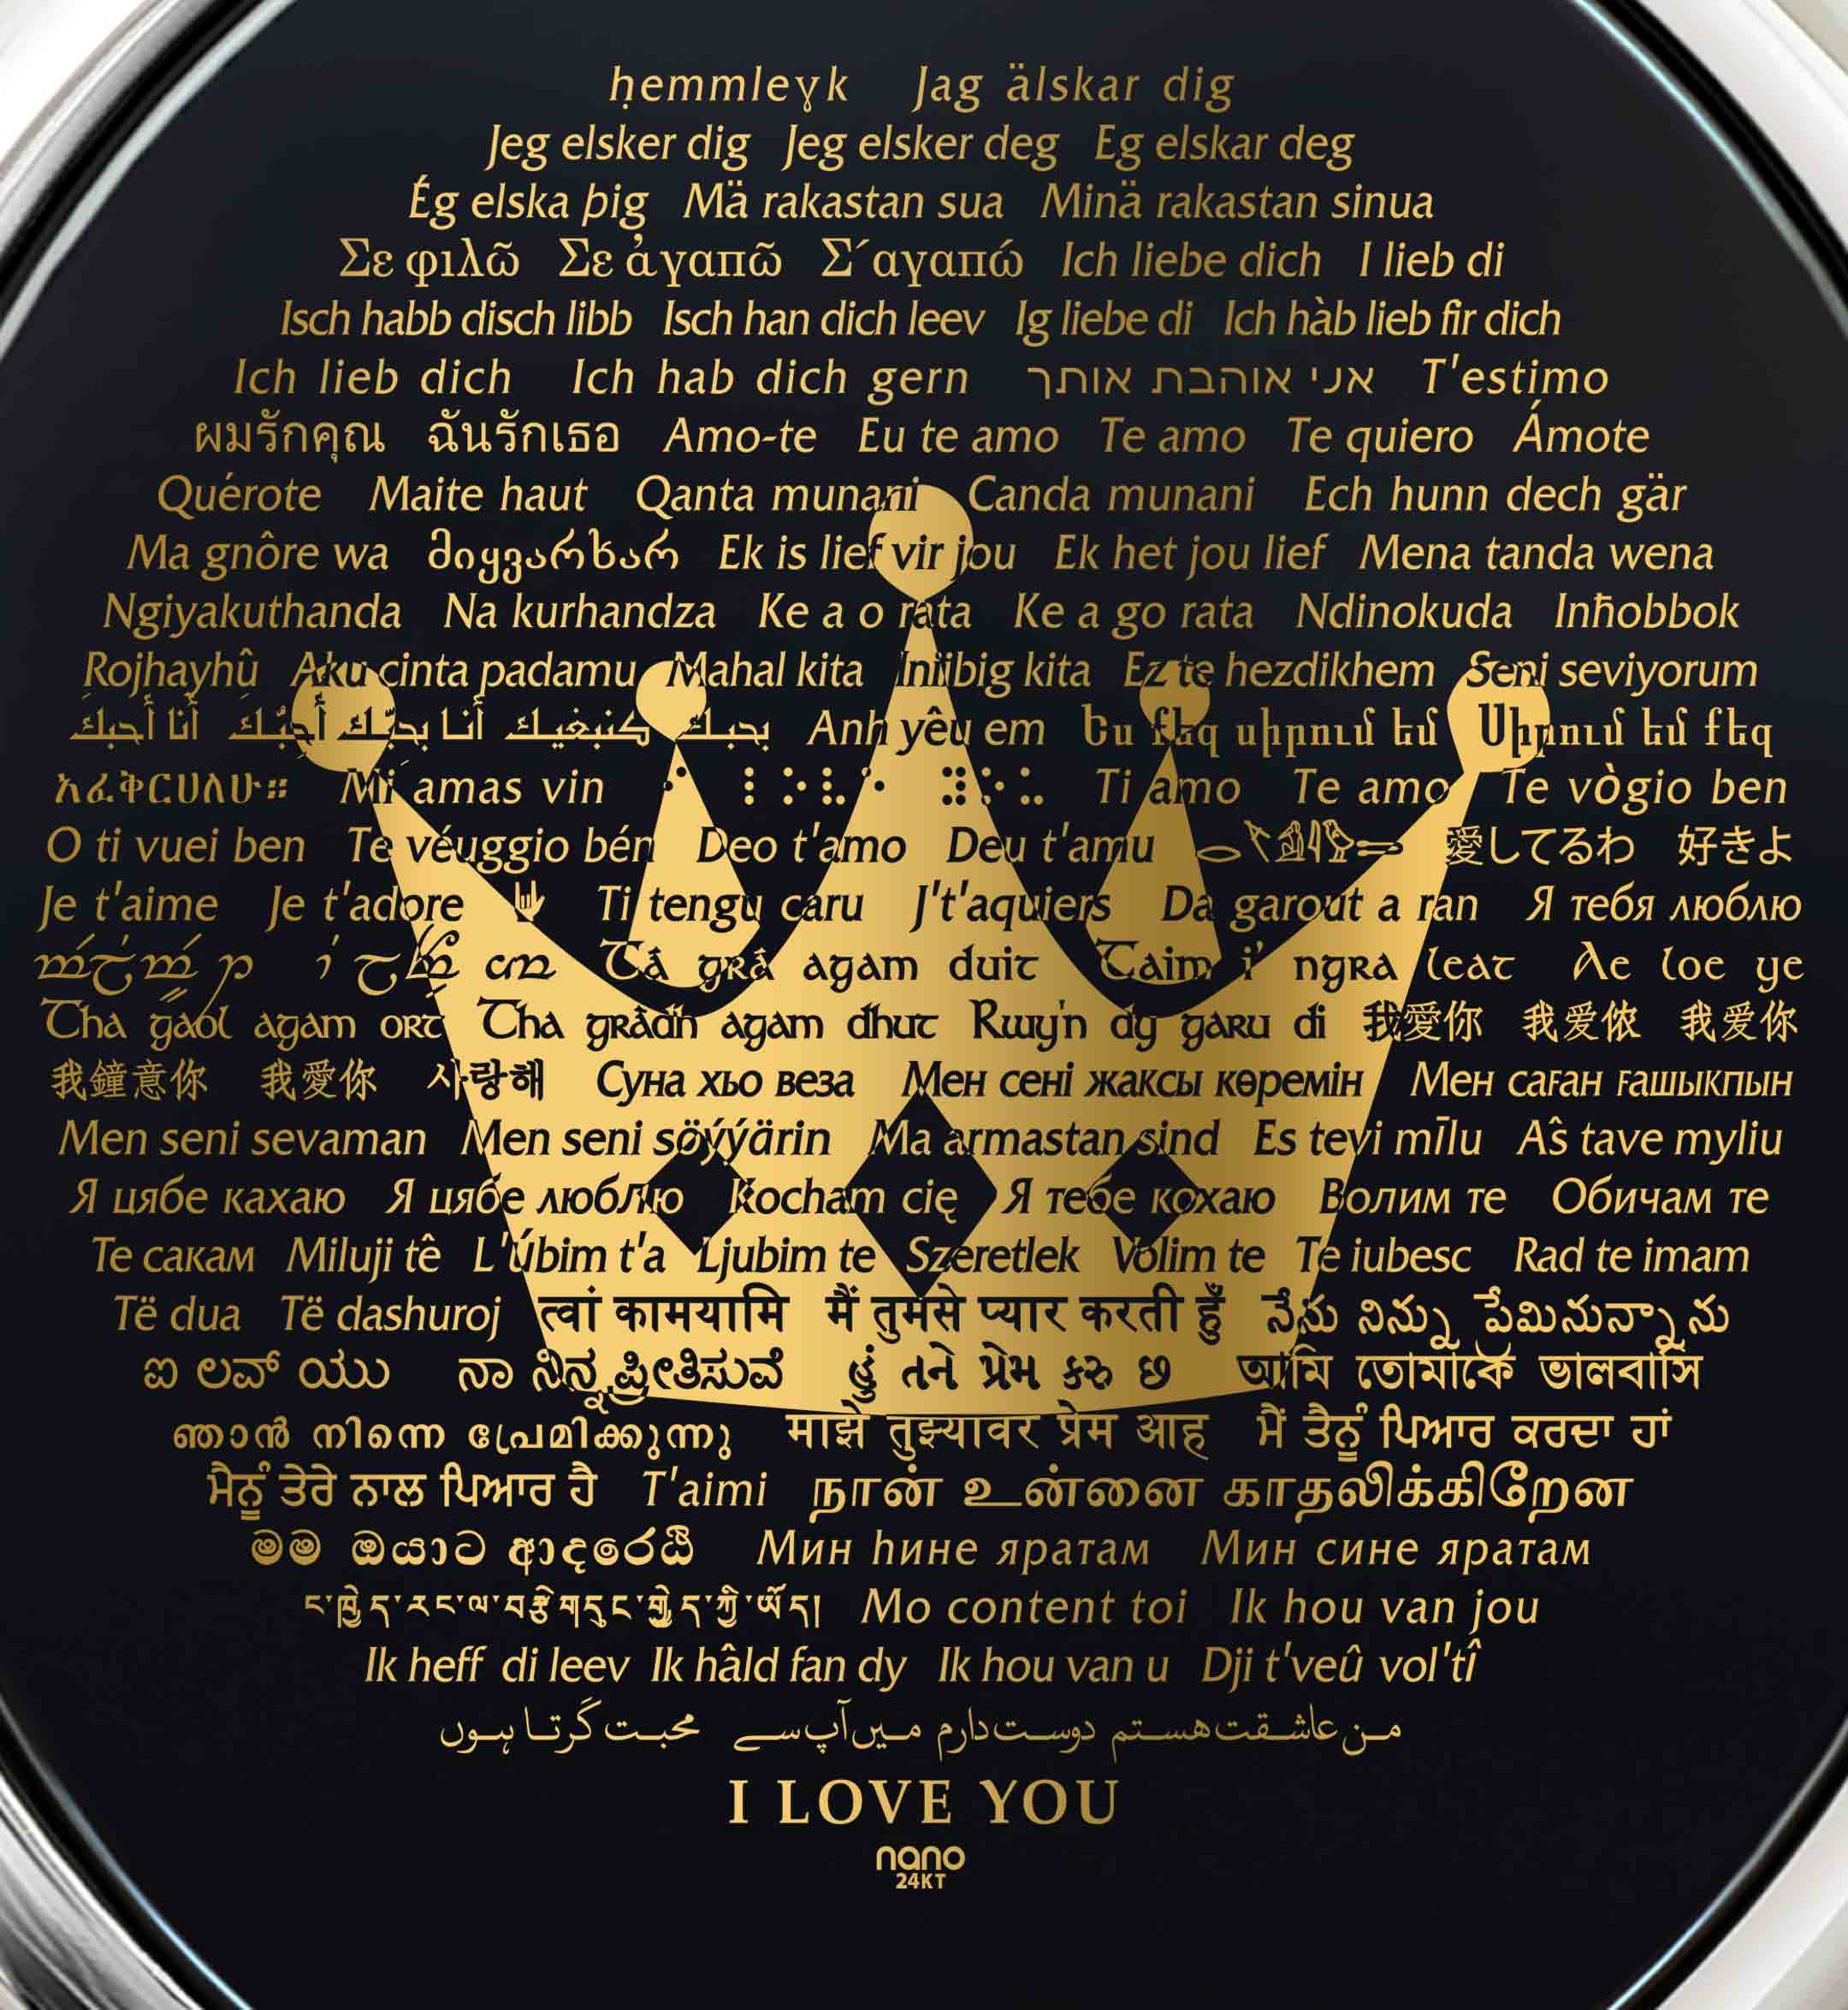 Round Onyx Pendant 'king' - 'I Love You' in 120 Languages